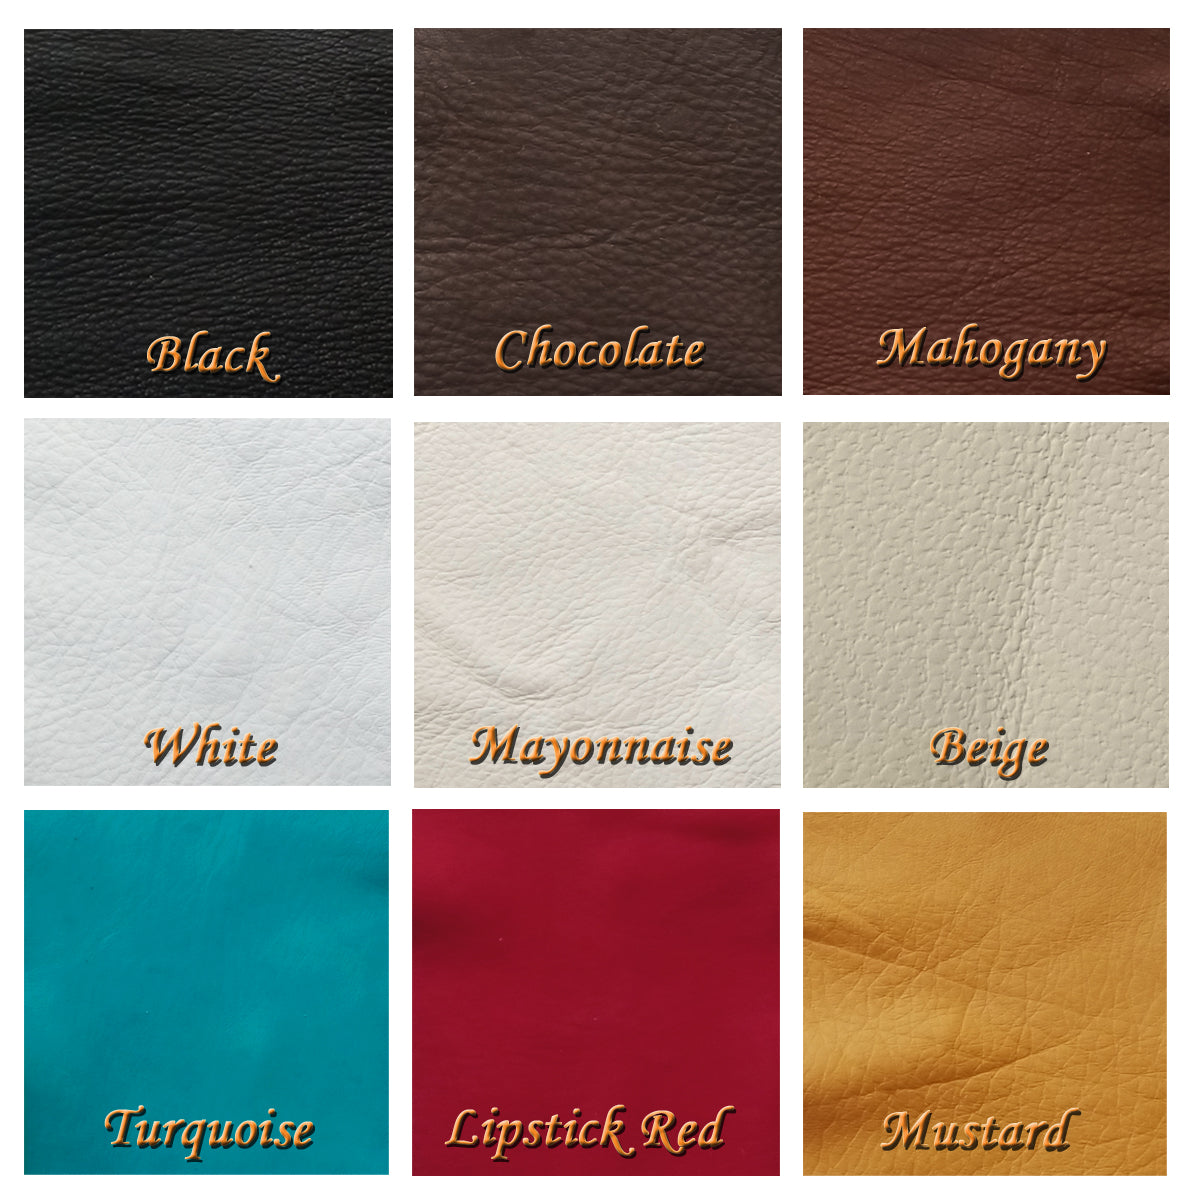 deerskin leather cuttings - leather color options